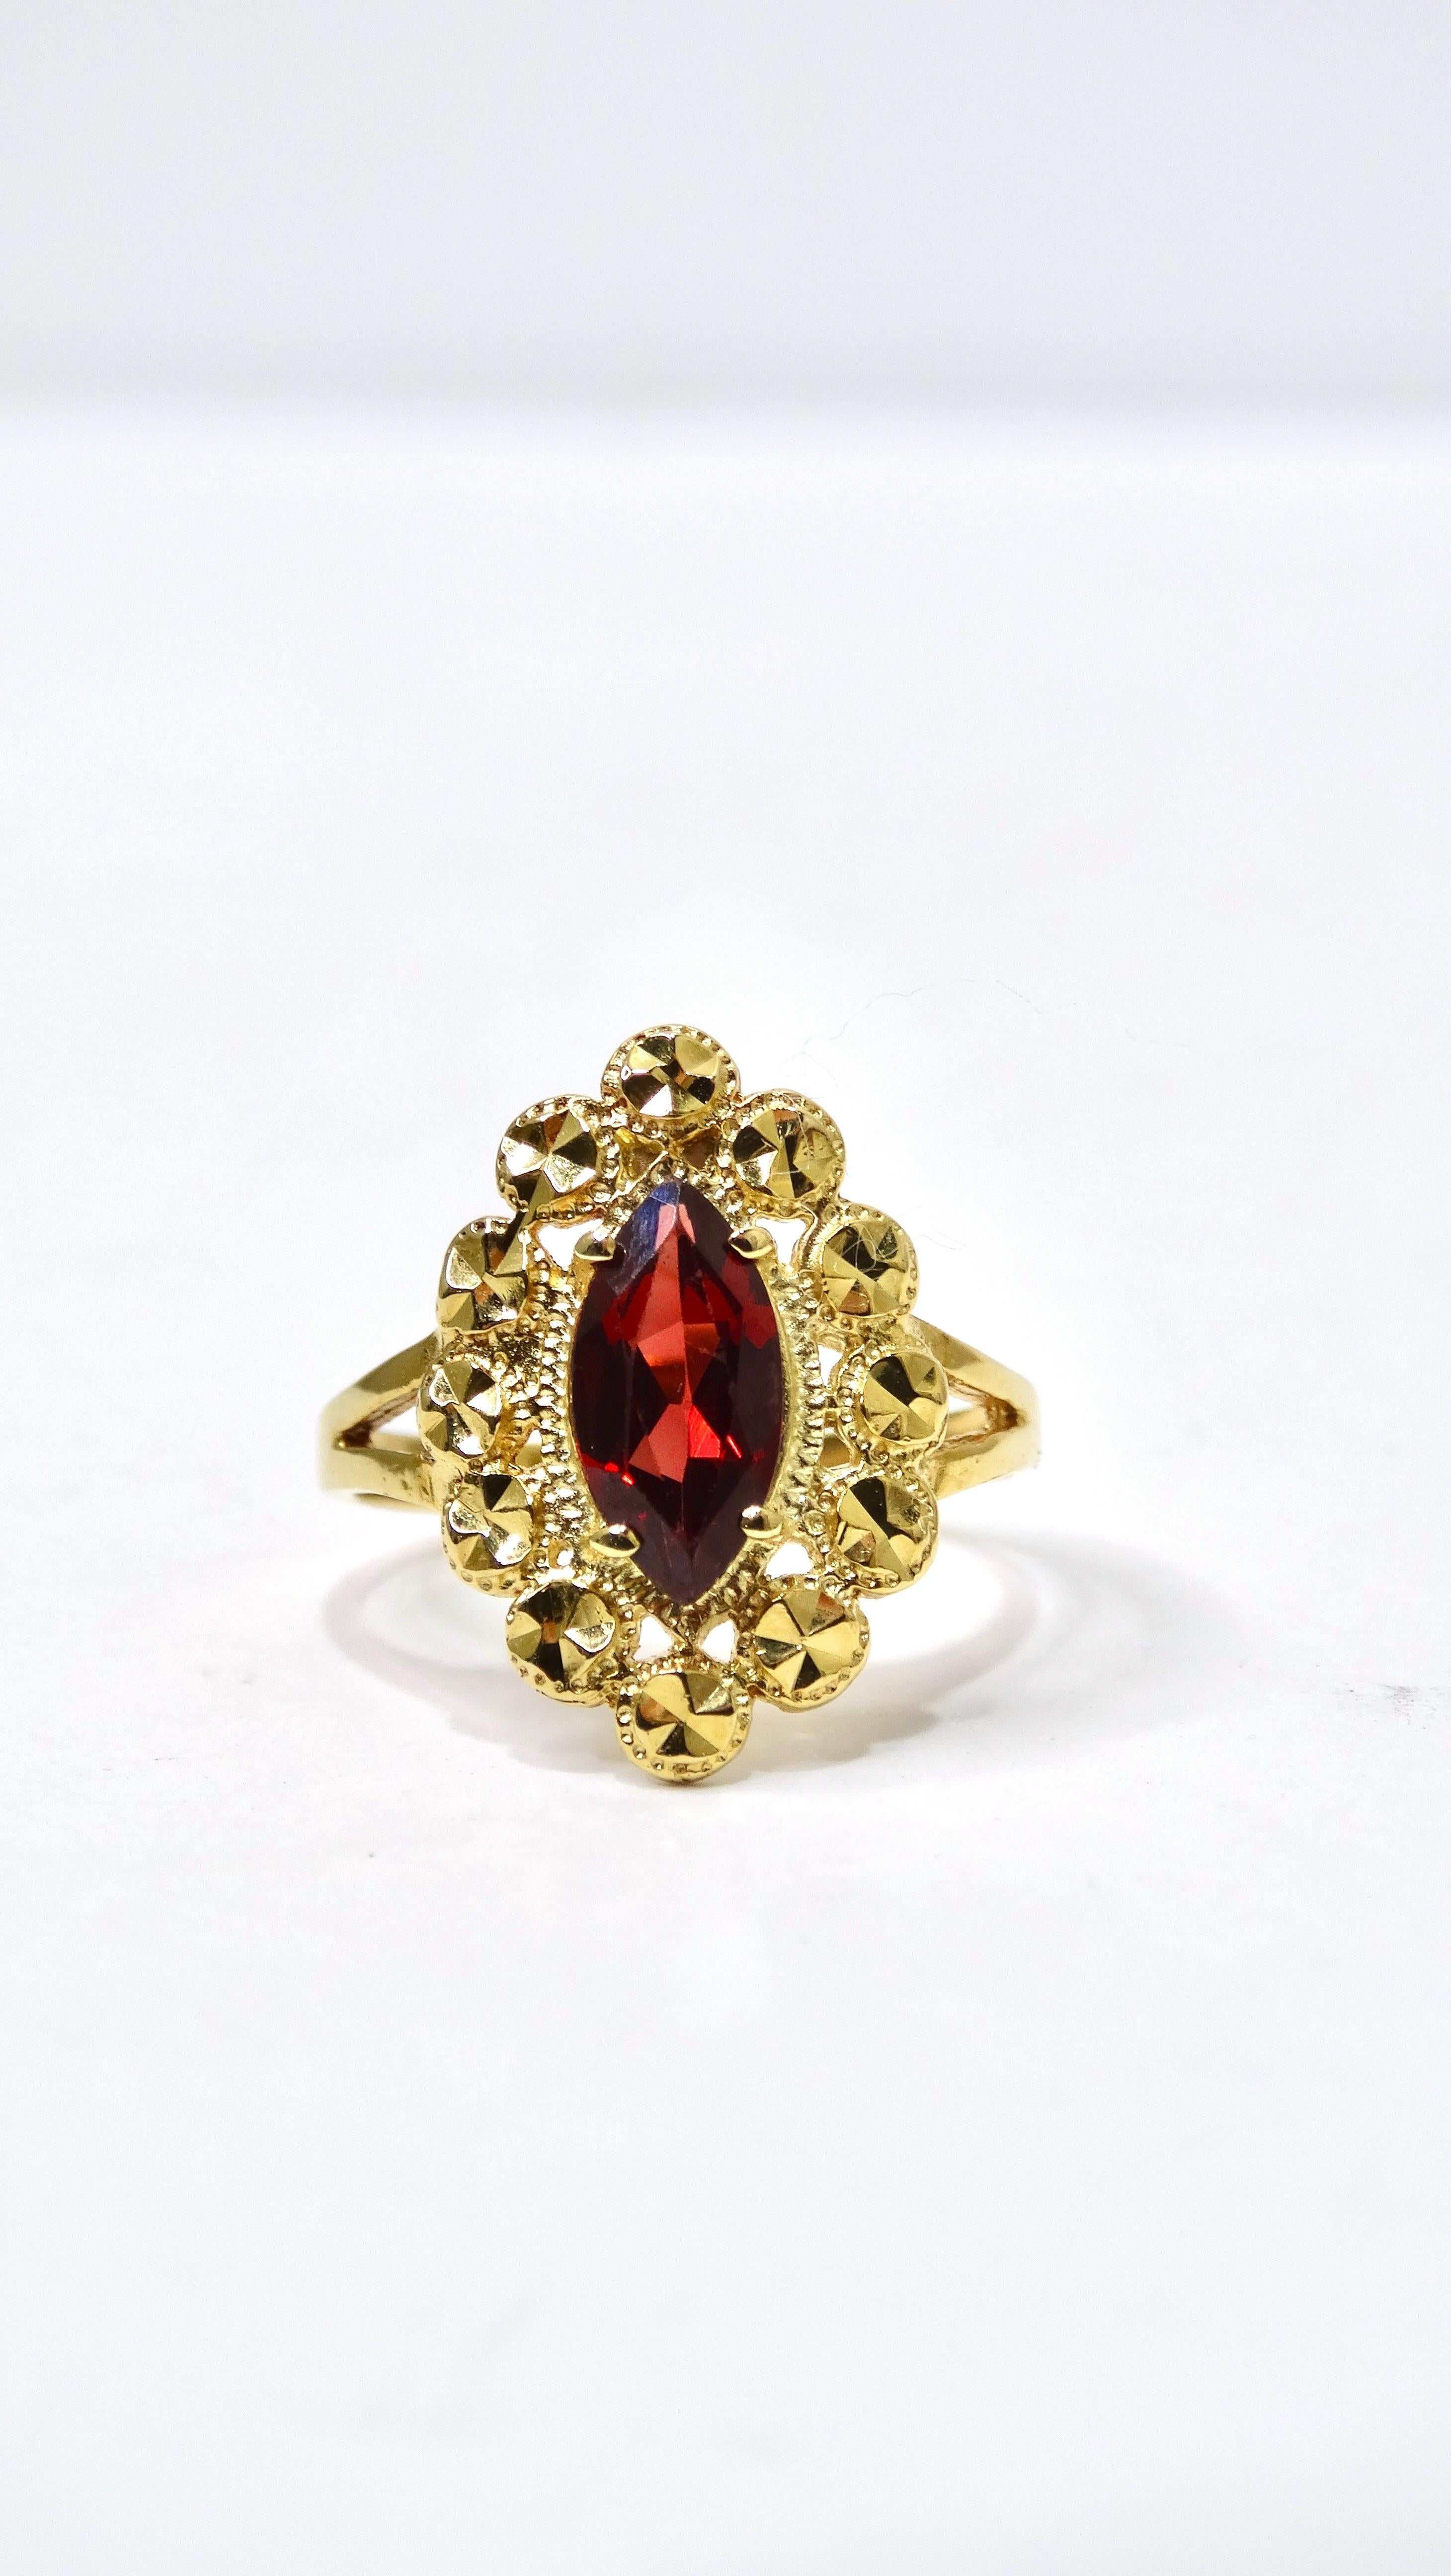 This impeccably designed ring can be yours today! Don't miss your chance to get your hands on this beautiful Garnet stone in a marquise cut. Garnet is the birthstone of January and signifies friendship, protection, trust, commitment, and love. It is